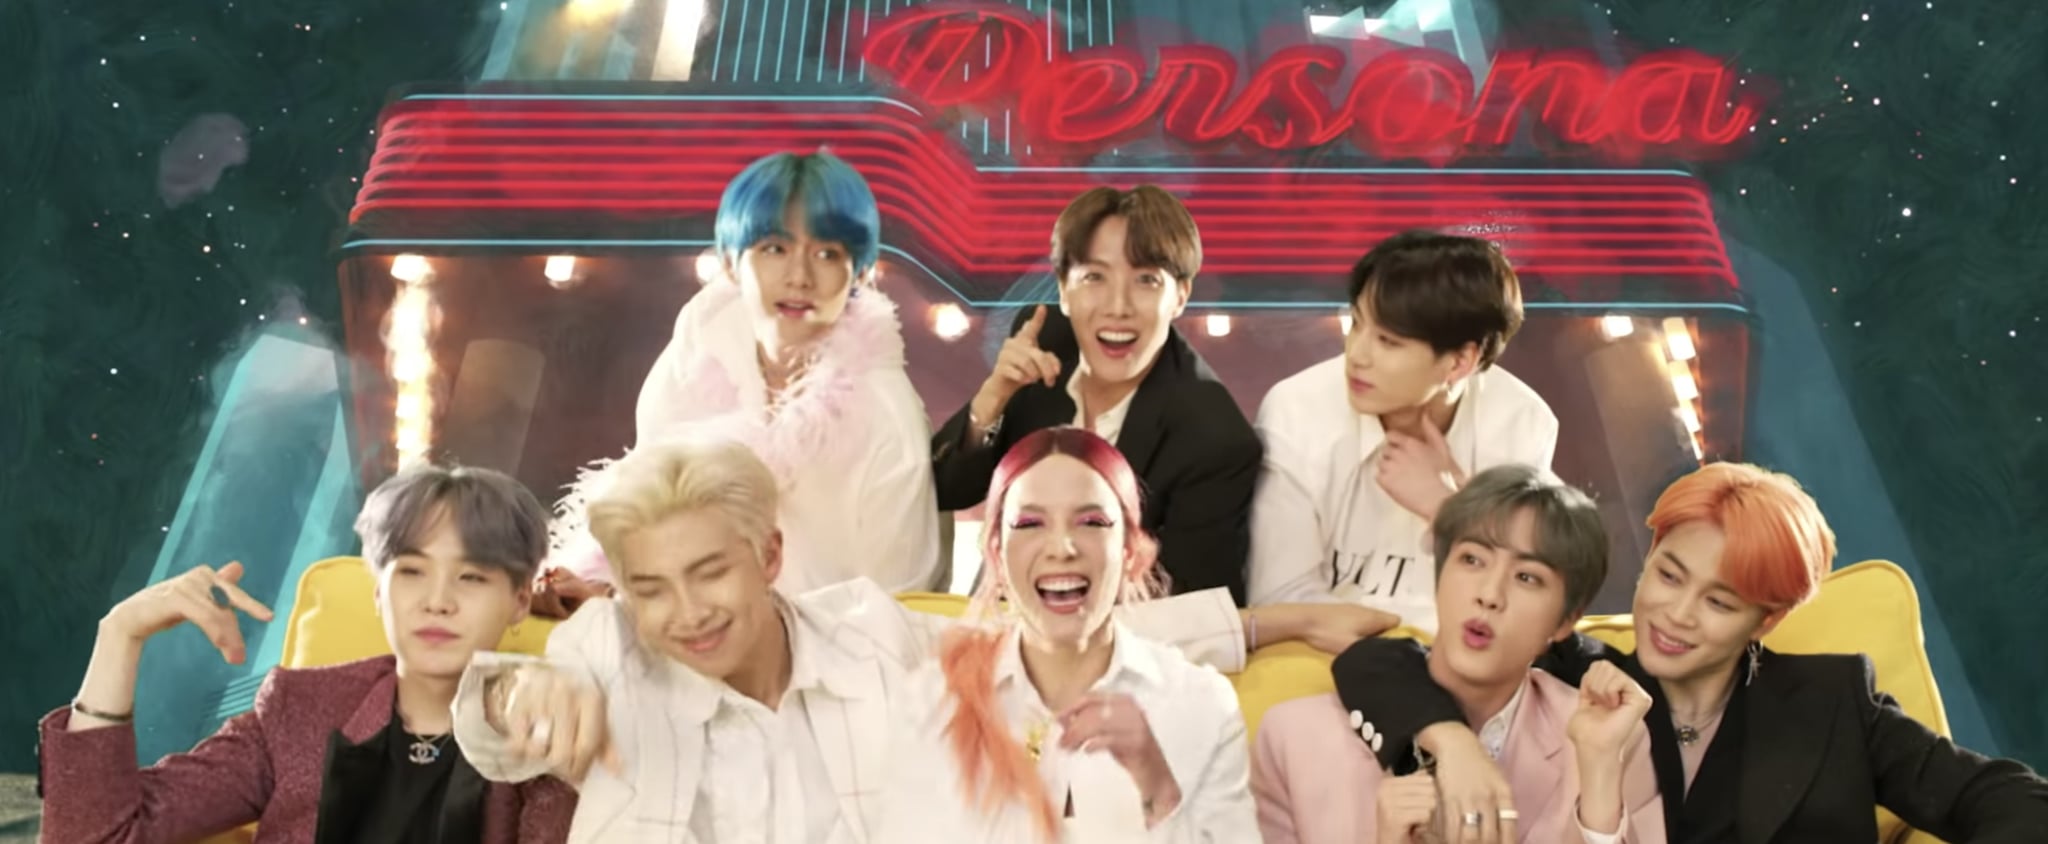 Bts And Halsey Boy With Luv Music Video Popsugar